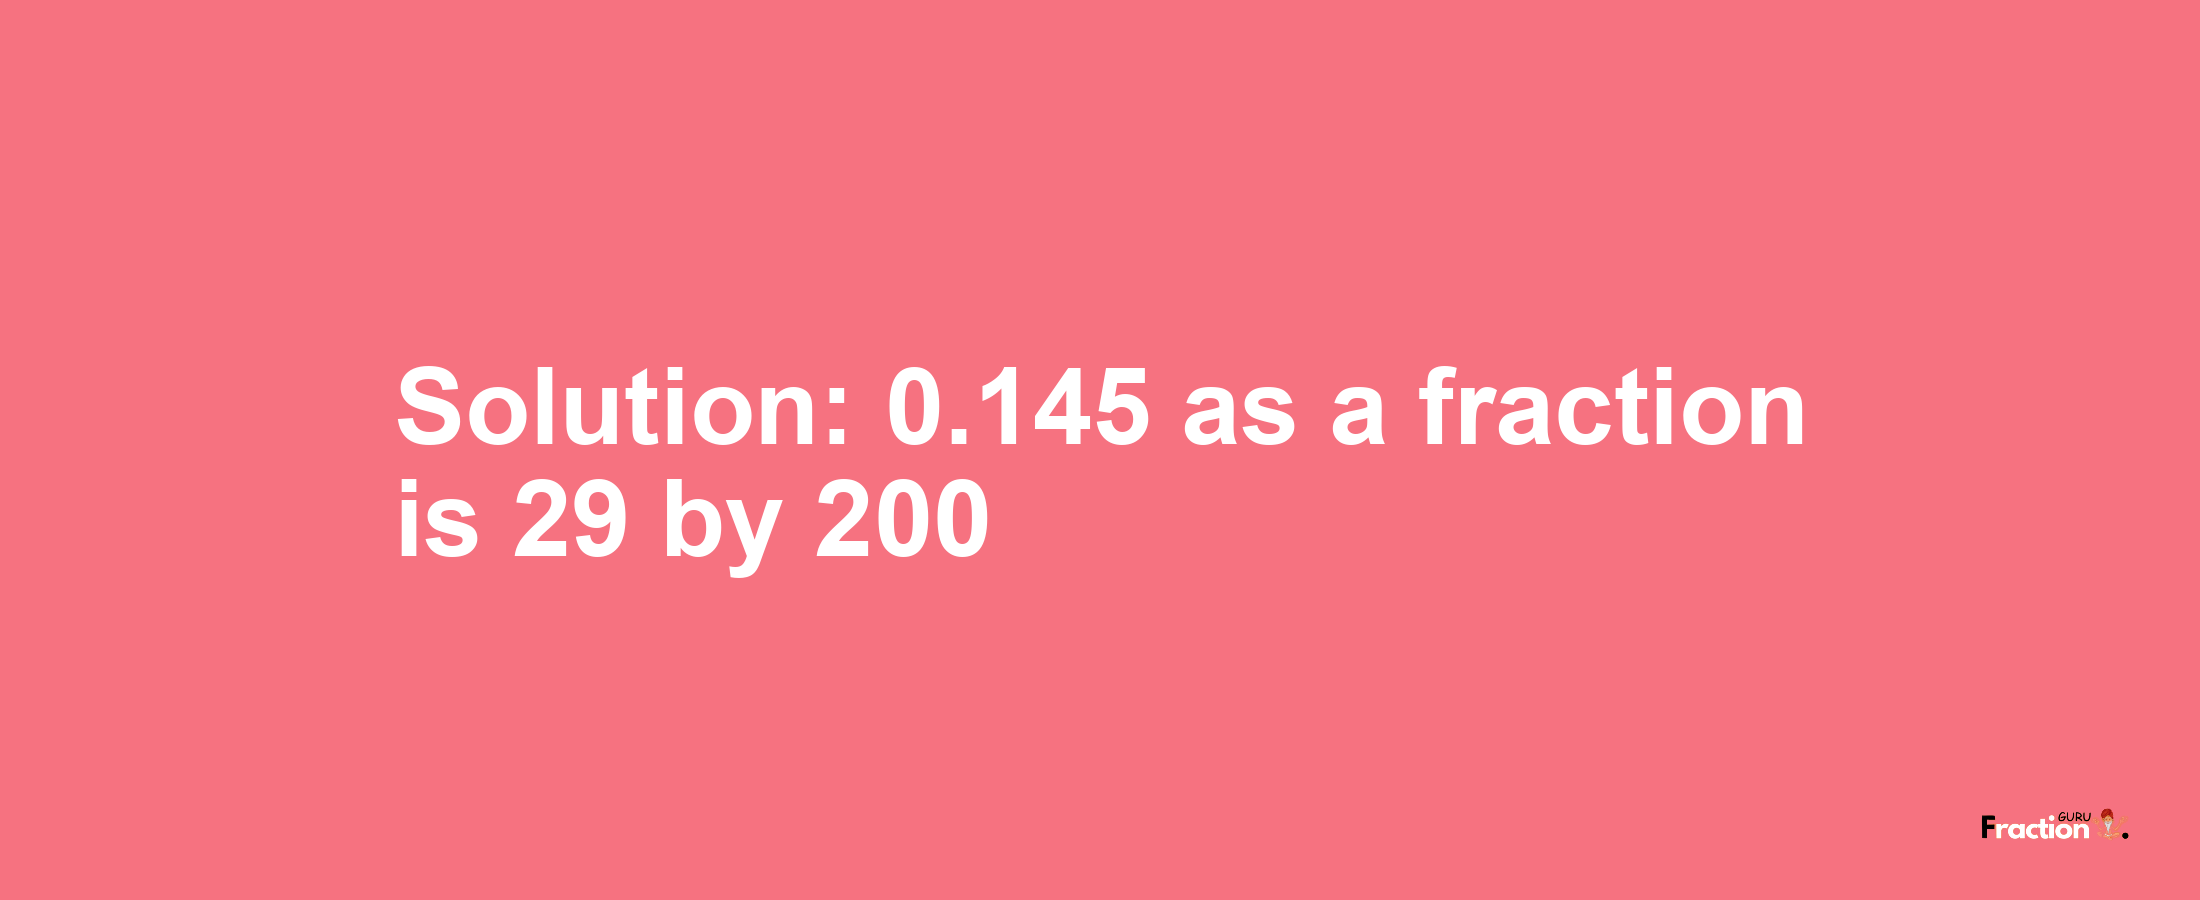 Solution:0.145 as a fraction is 29/200